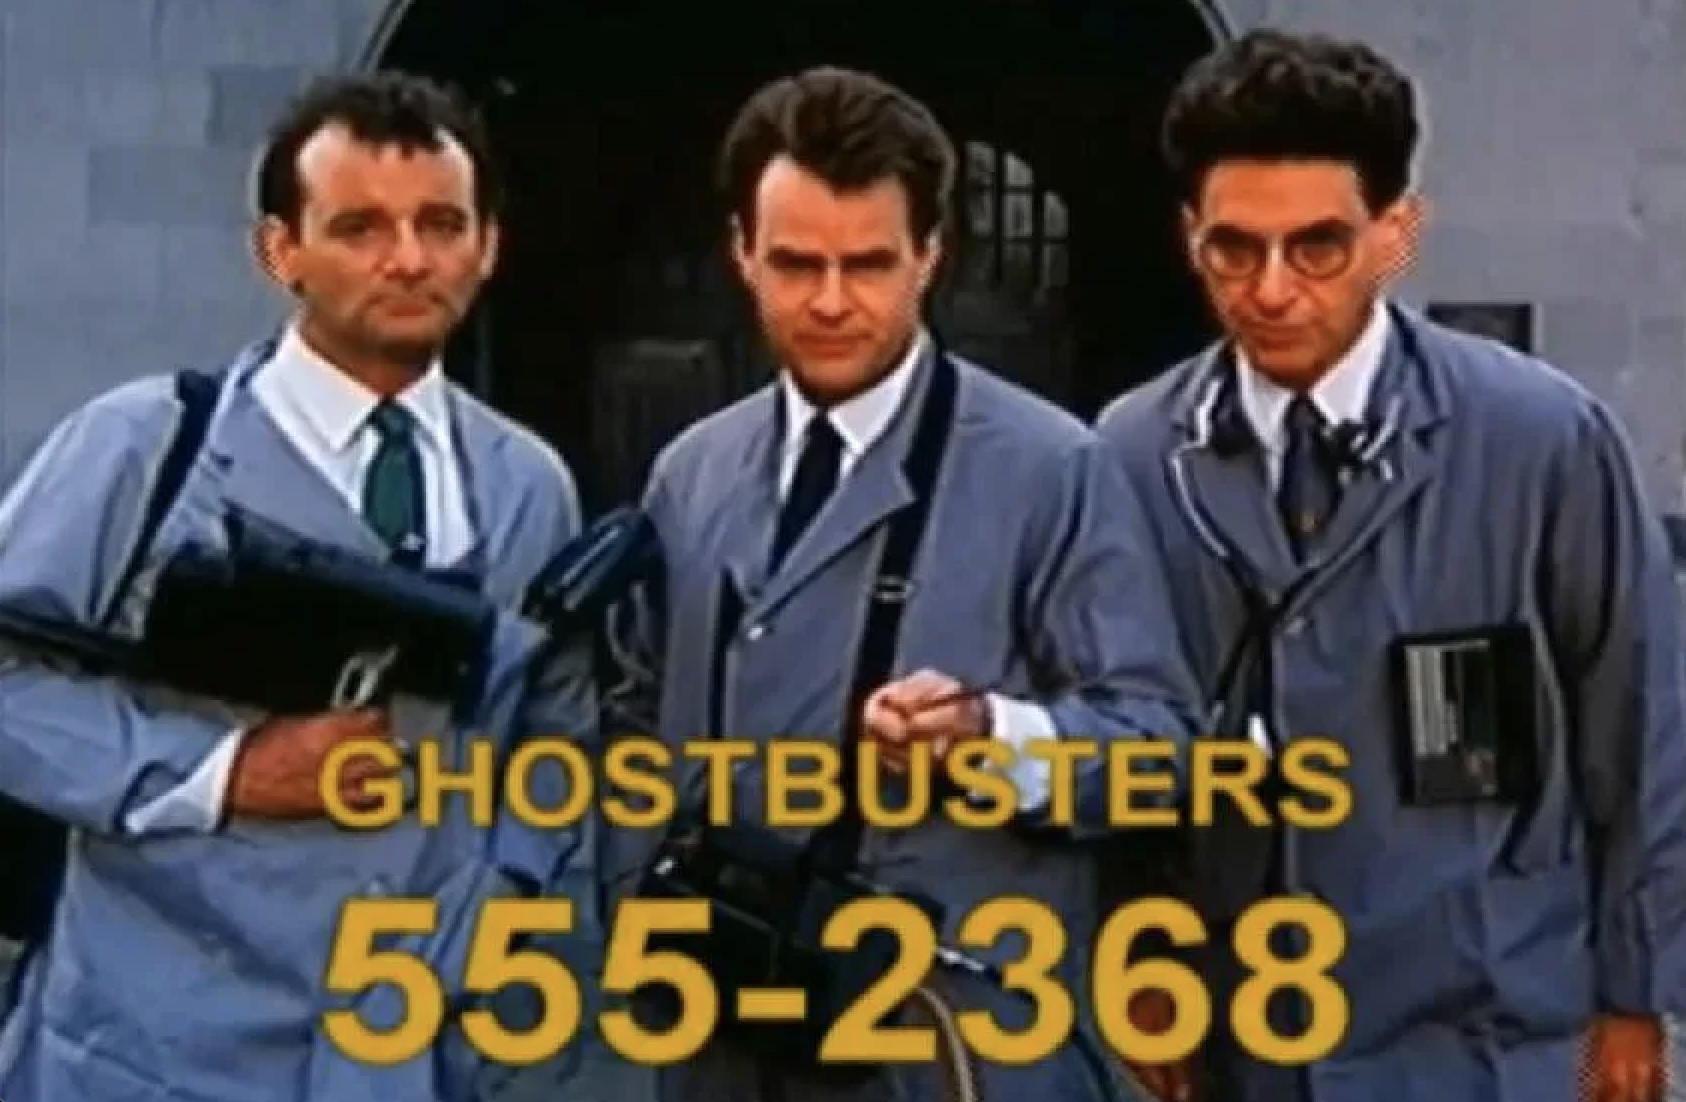 Example of a 555 phone number being used in the Ghostbusters Movie